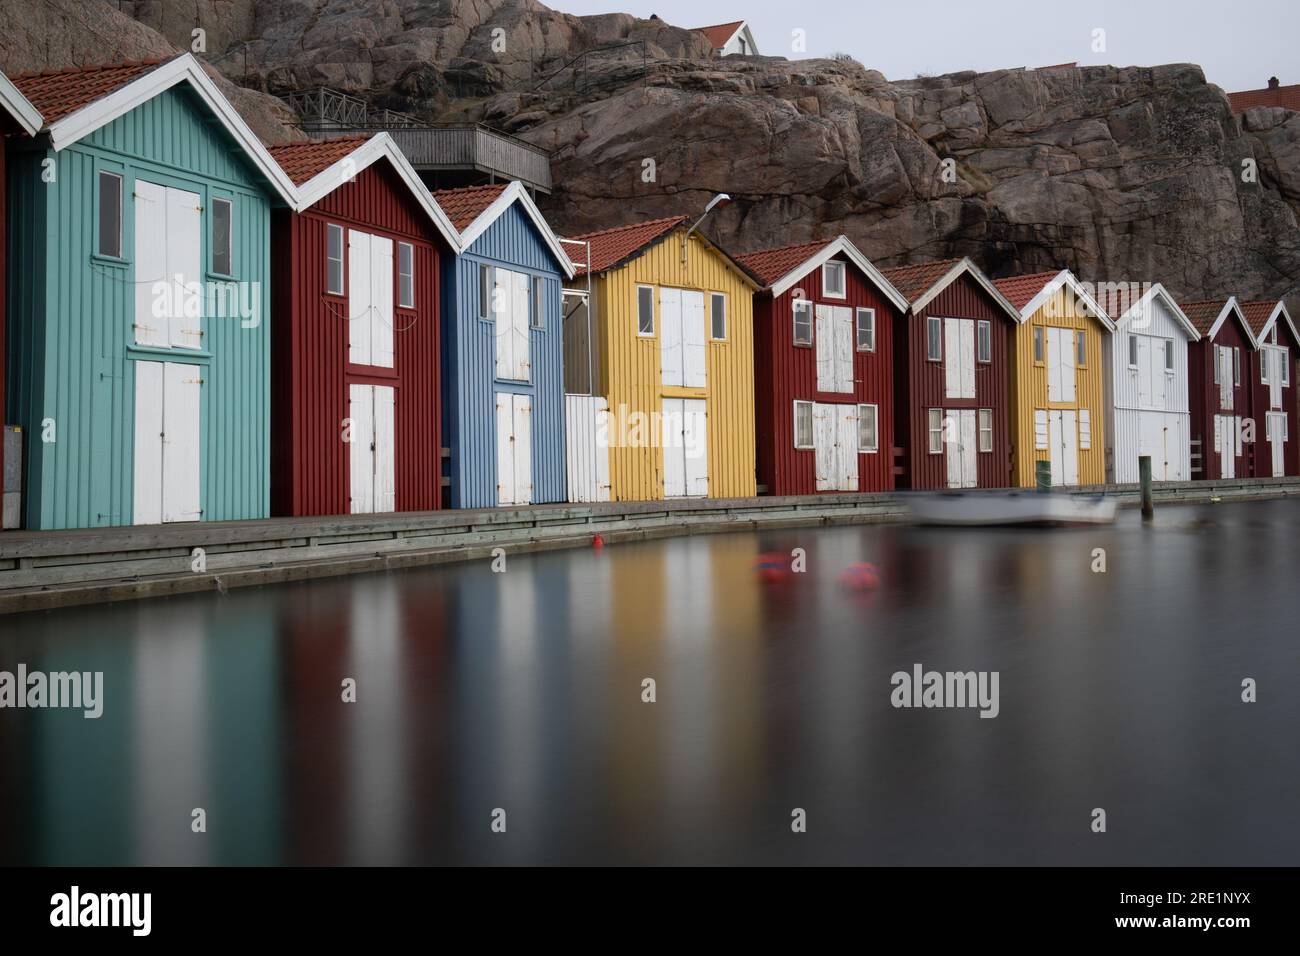 Sweden houses, small colorful fishermen's houses in Sweden smog. A great city right by the sea with a rock in the background, smögen Stock Photo